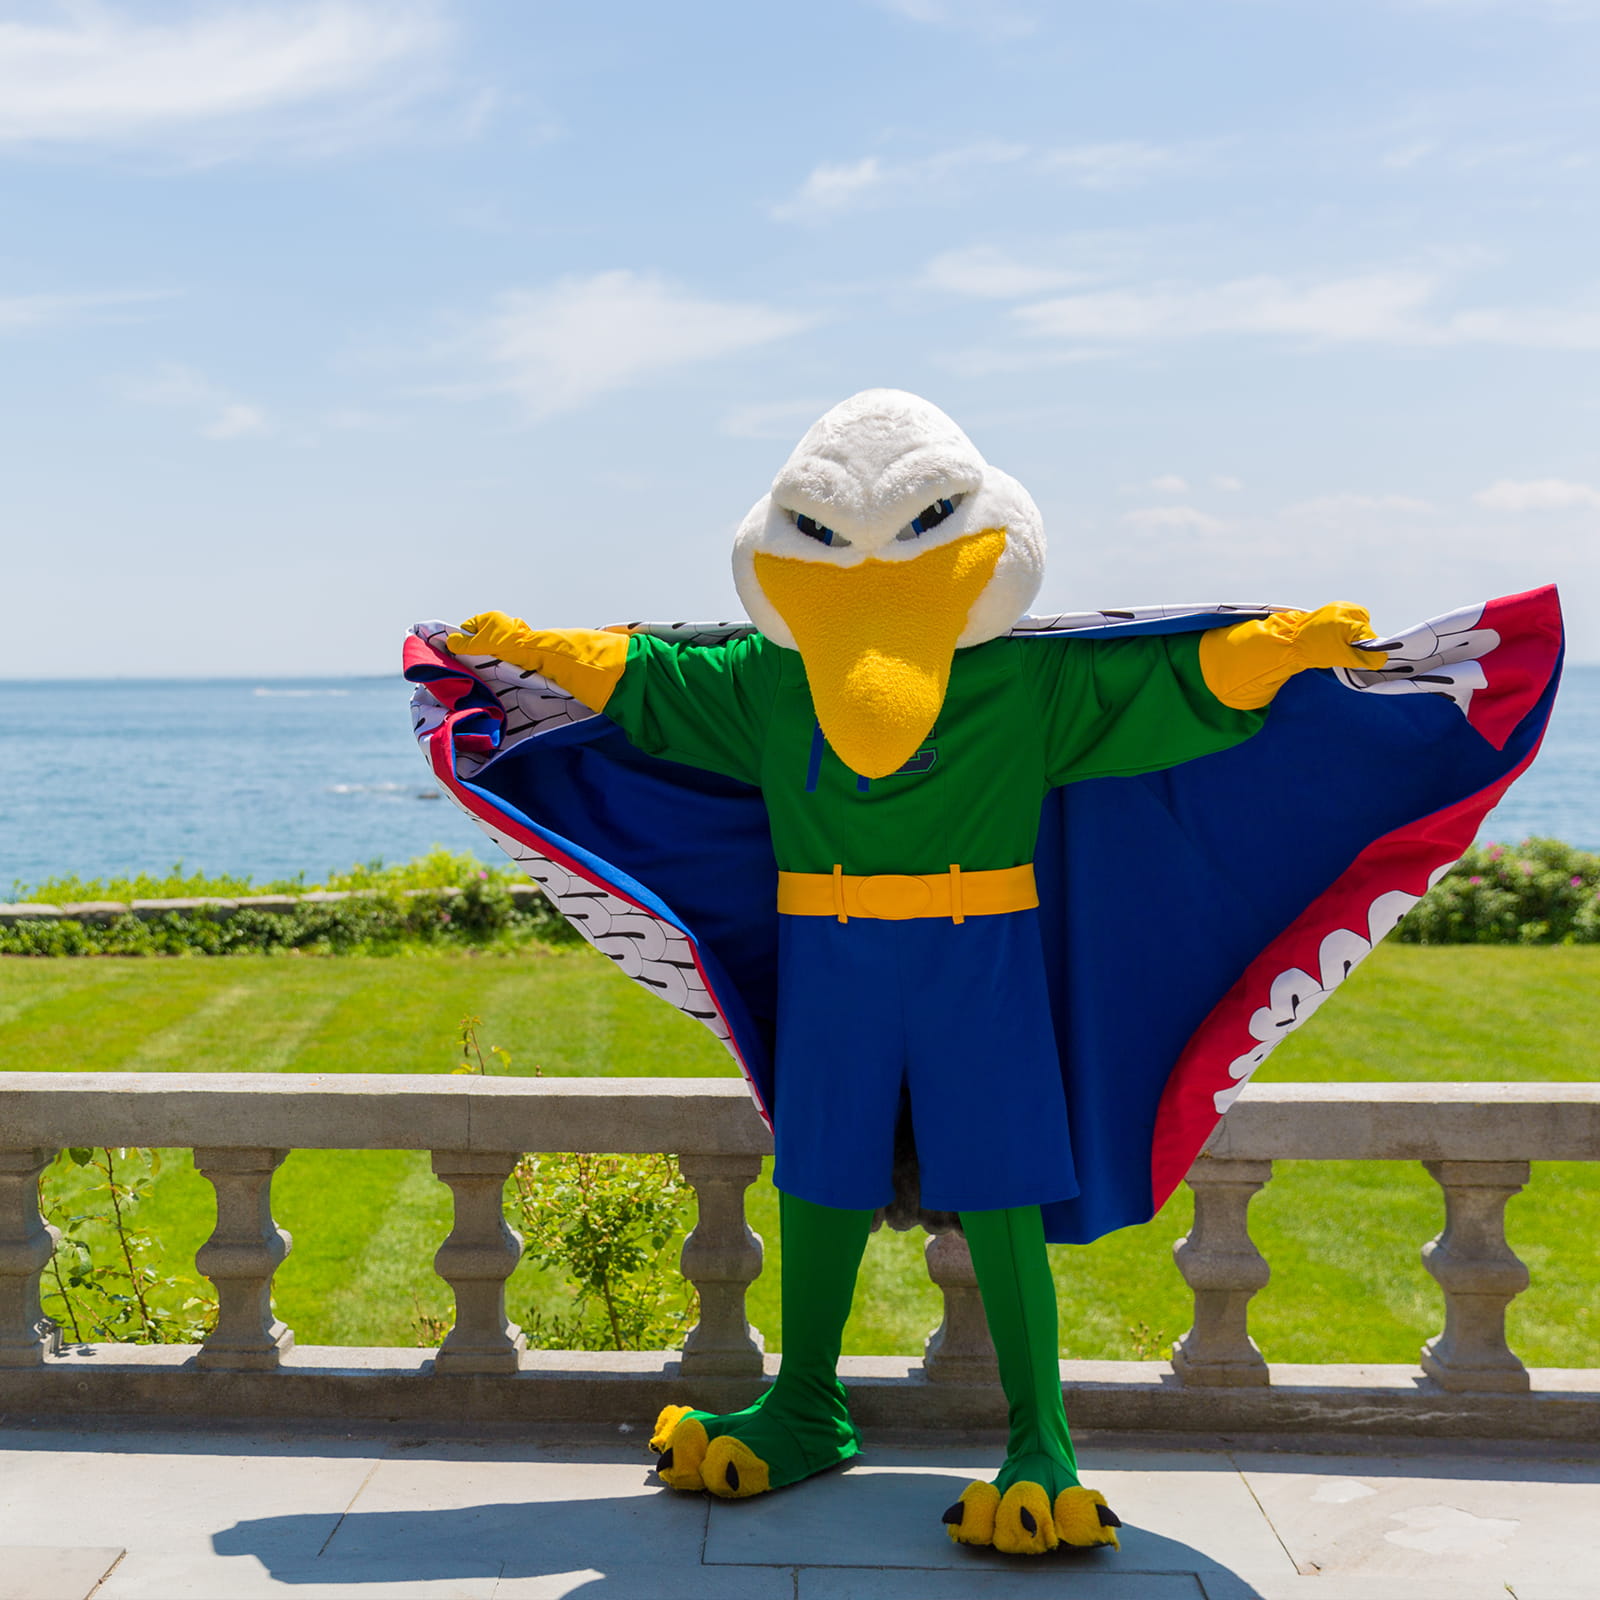 endicott gull mascot standing with wings extended with ocean in bakcground